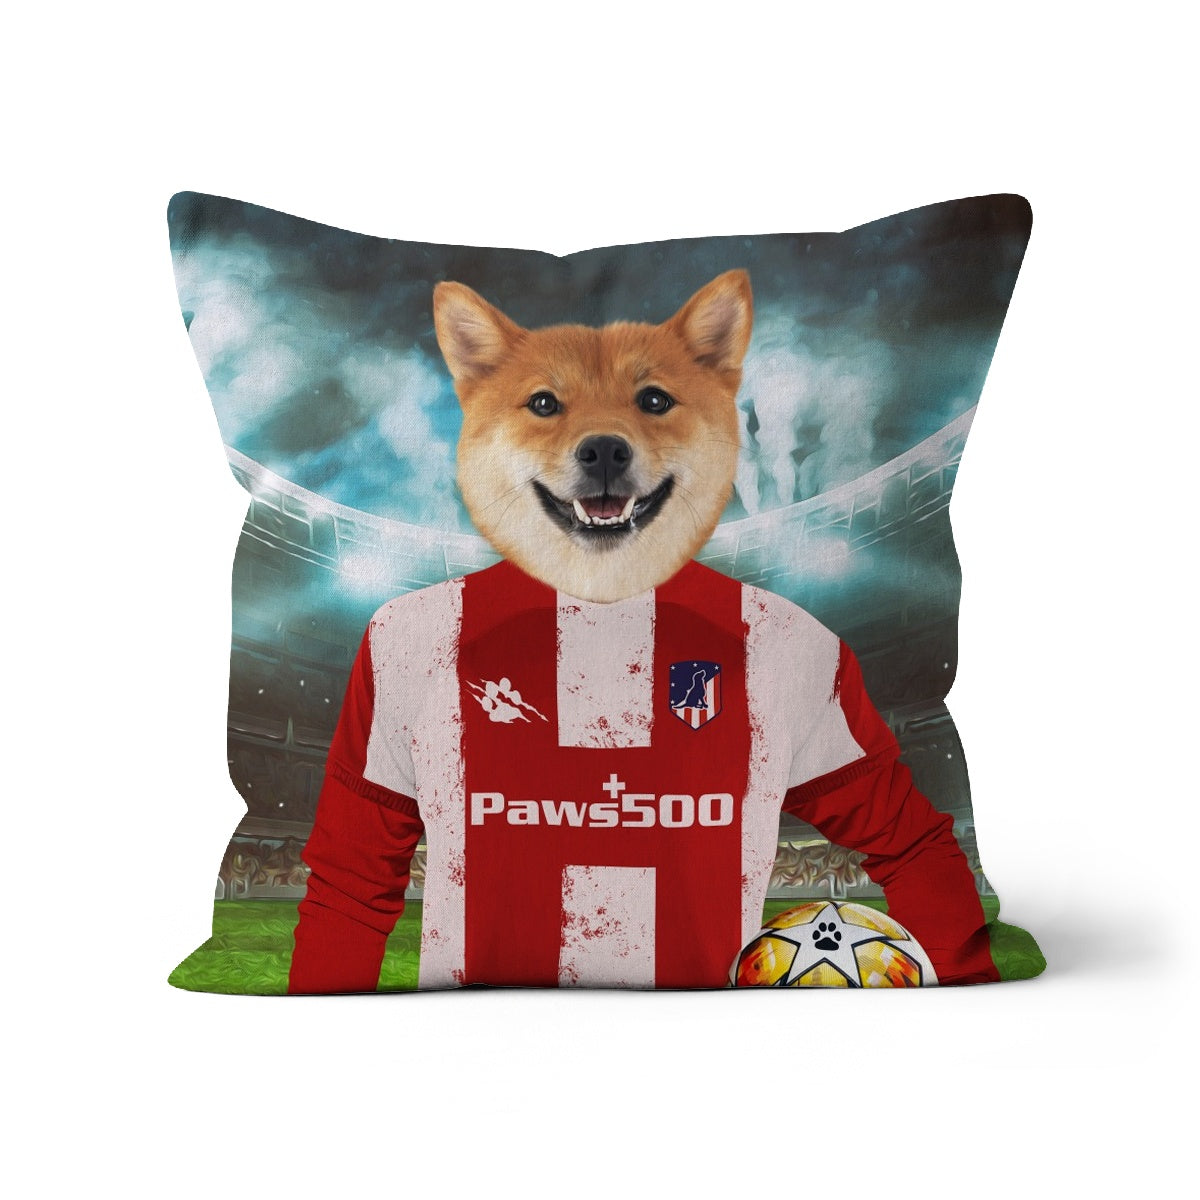 Pawtheletico Madrid Football Club Paw & Glory, paw and glory, pet pillow, pillow custom, Pet Portraits cushion, dog pillow custom, custom pet pillows, create your own pillow, customized throw pillows